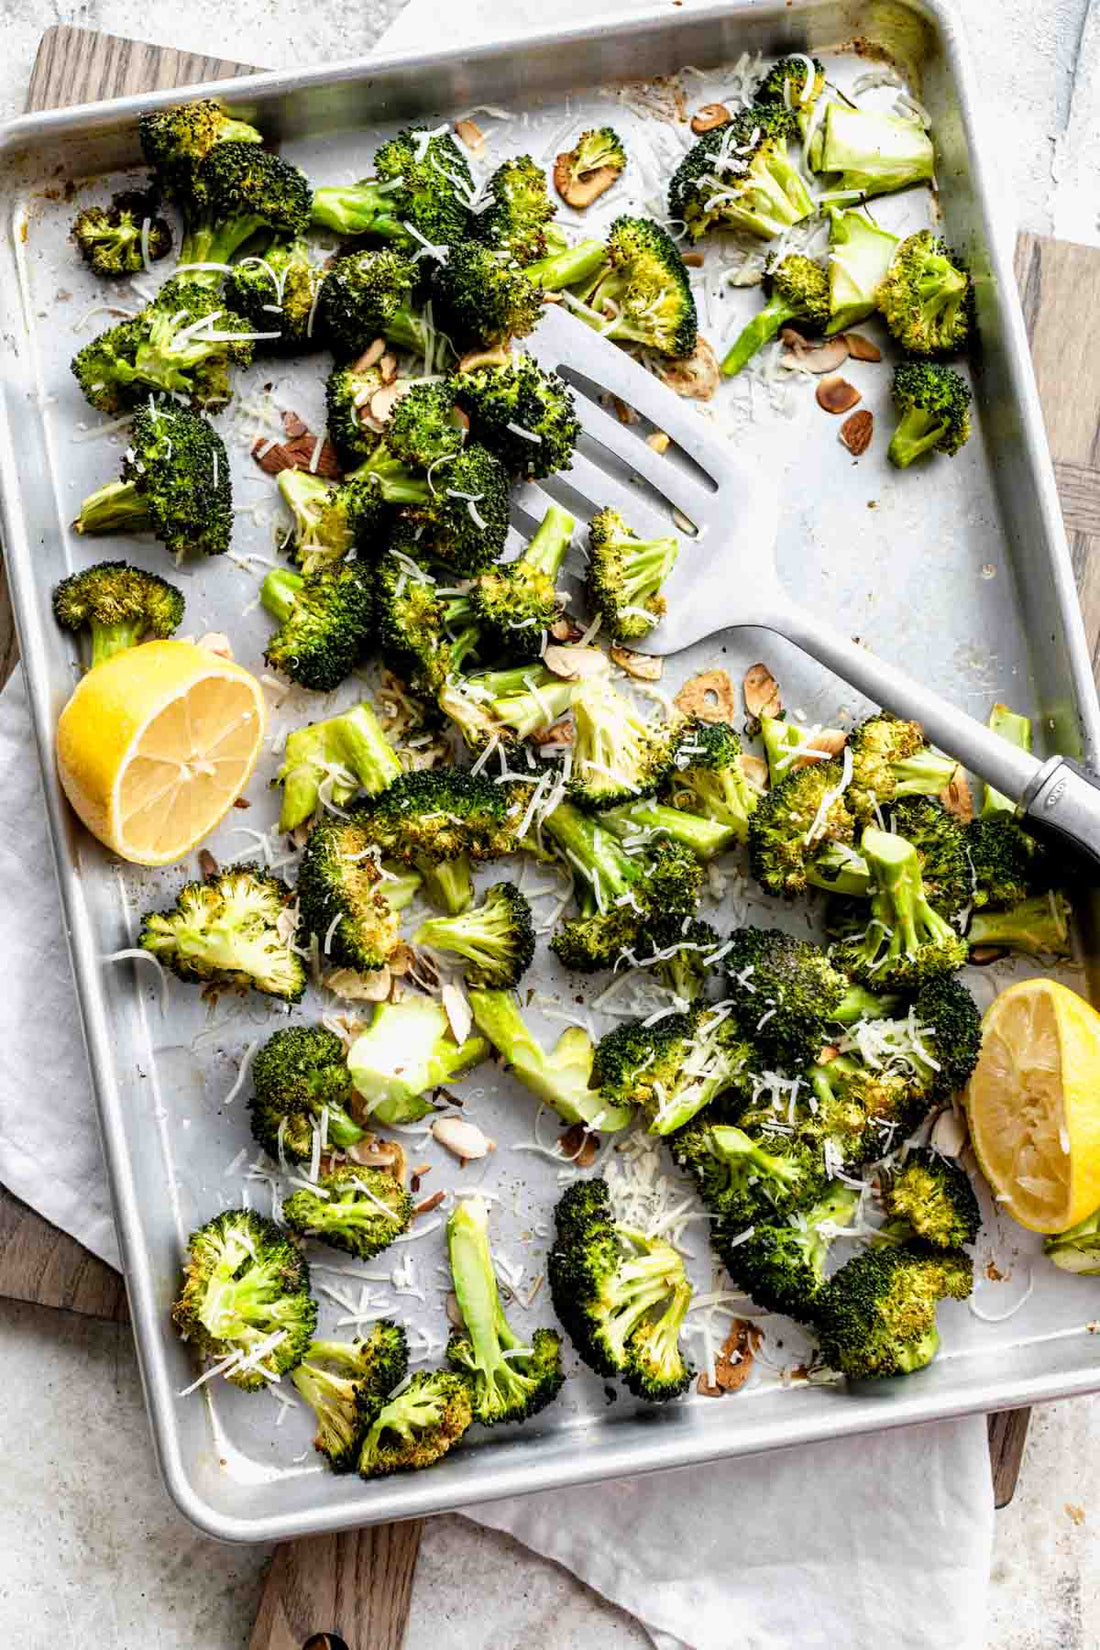 Roasted Broccoli with Garlic and Almonds